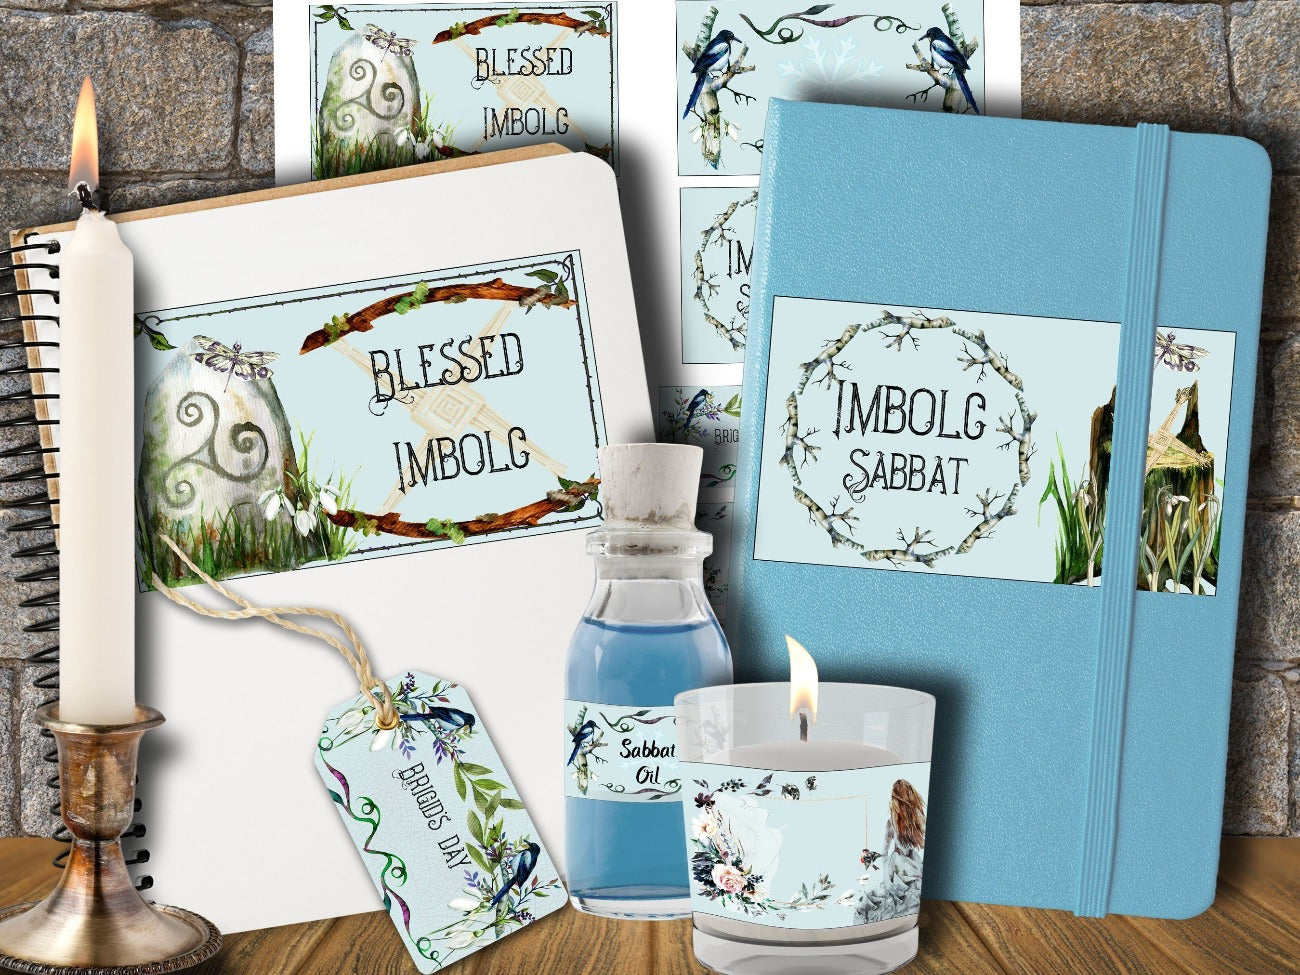 IMBOLC LABELS, 6 Sabbat Printables for Witchcraft Rituals & Spells, shown in use appled to journal cover, glass candle holder, potion bottle and gift tag - Morgana Magick Spell